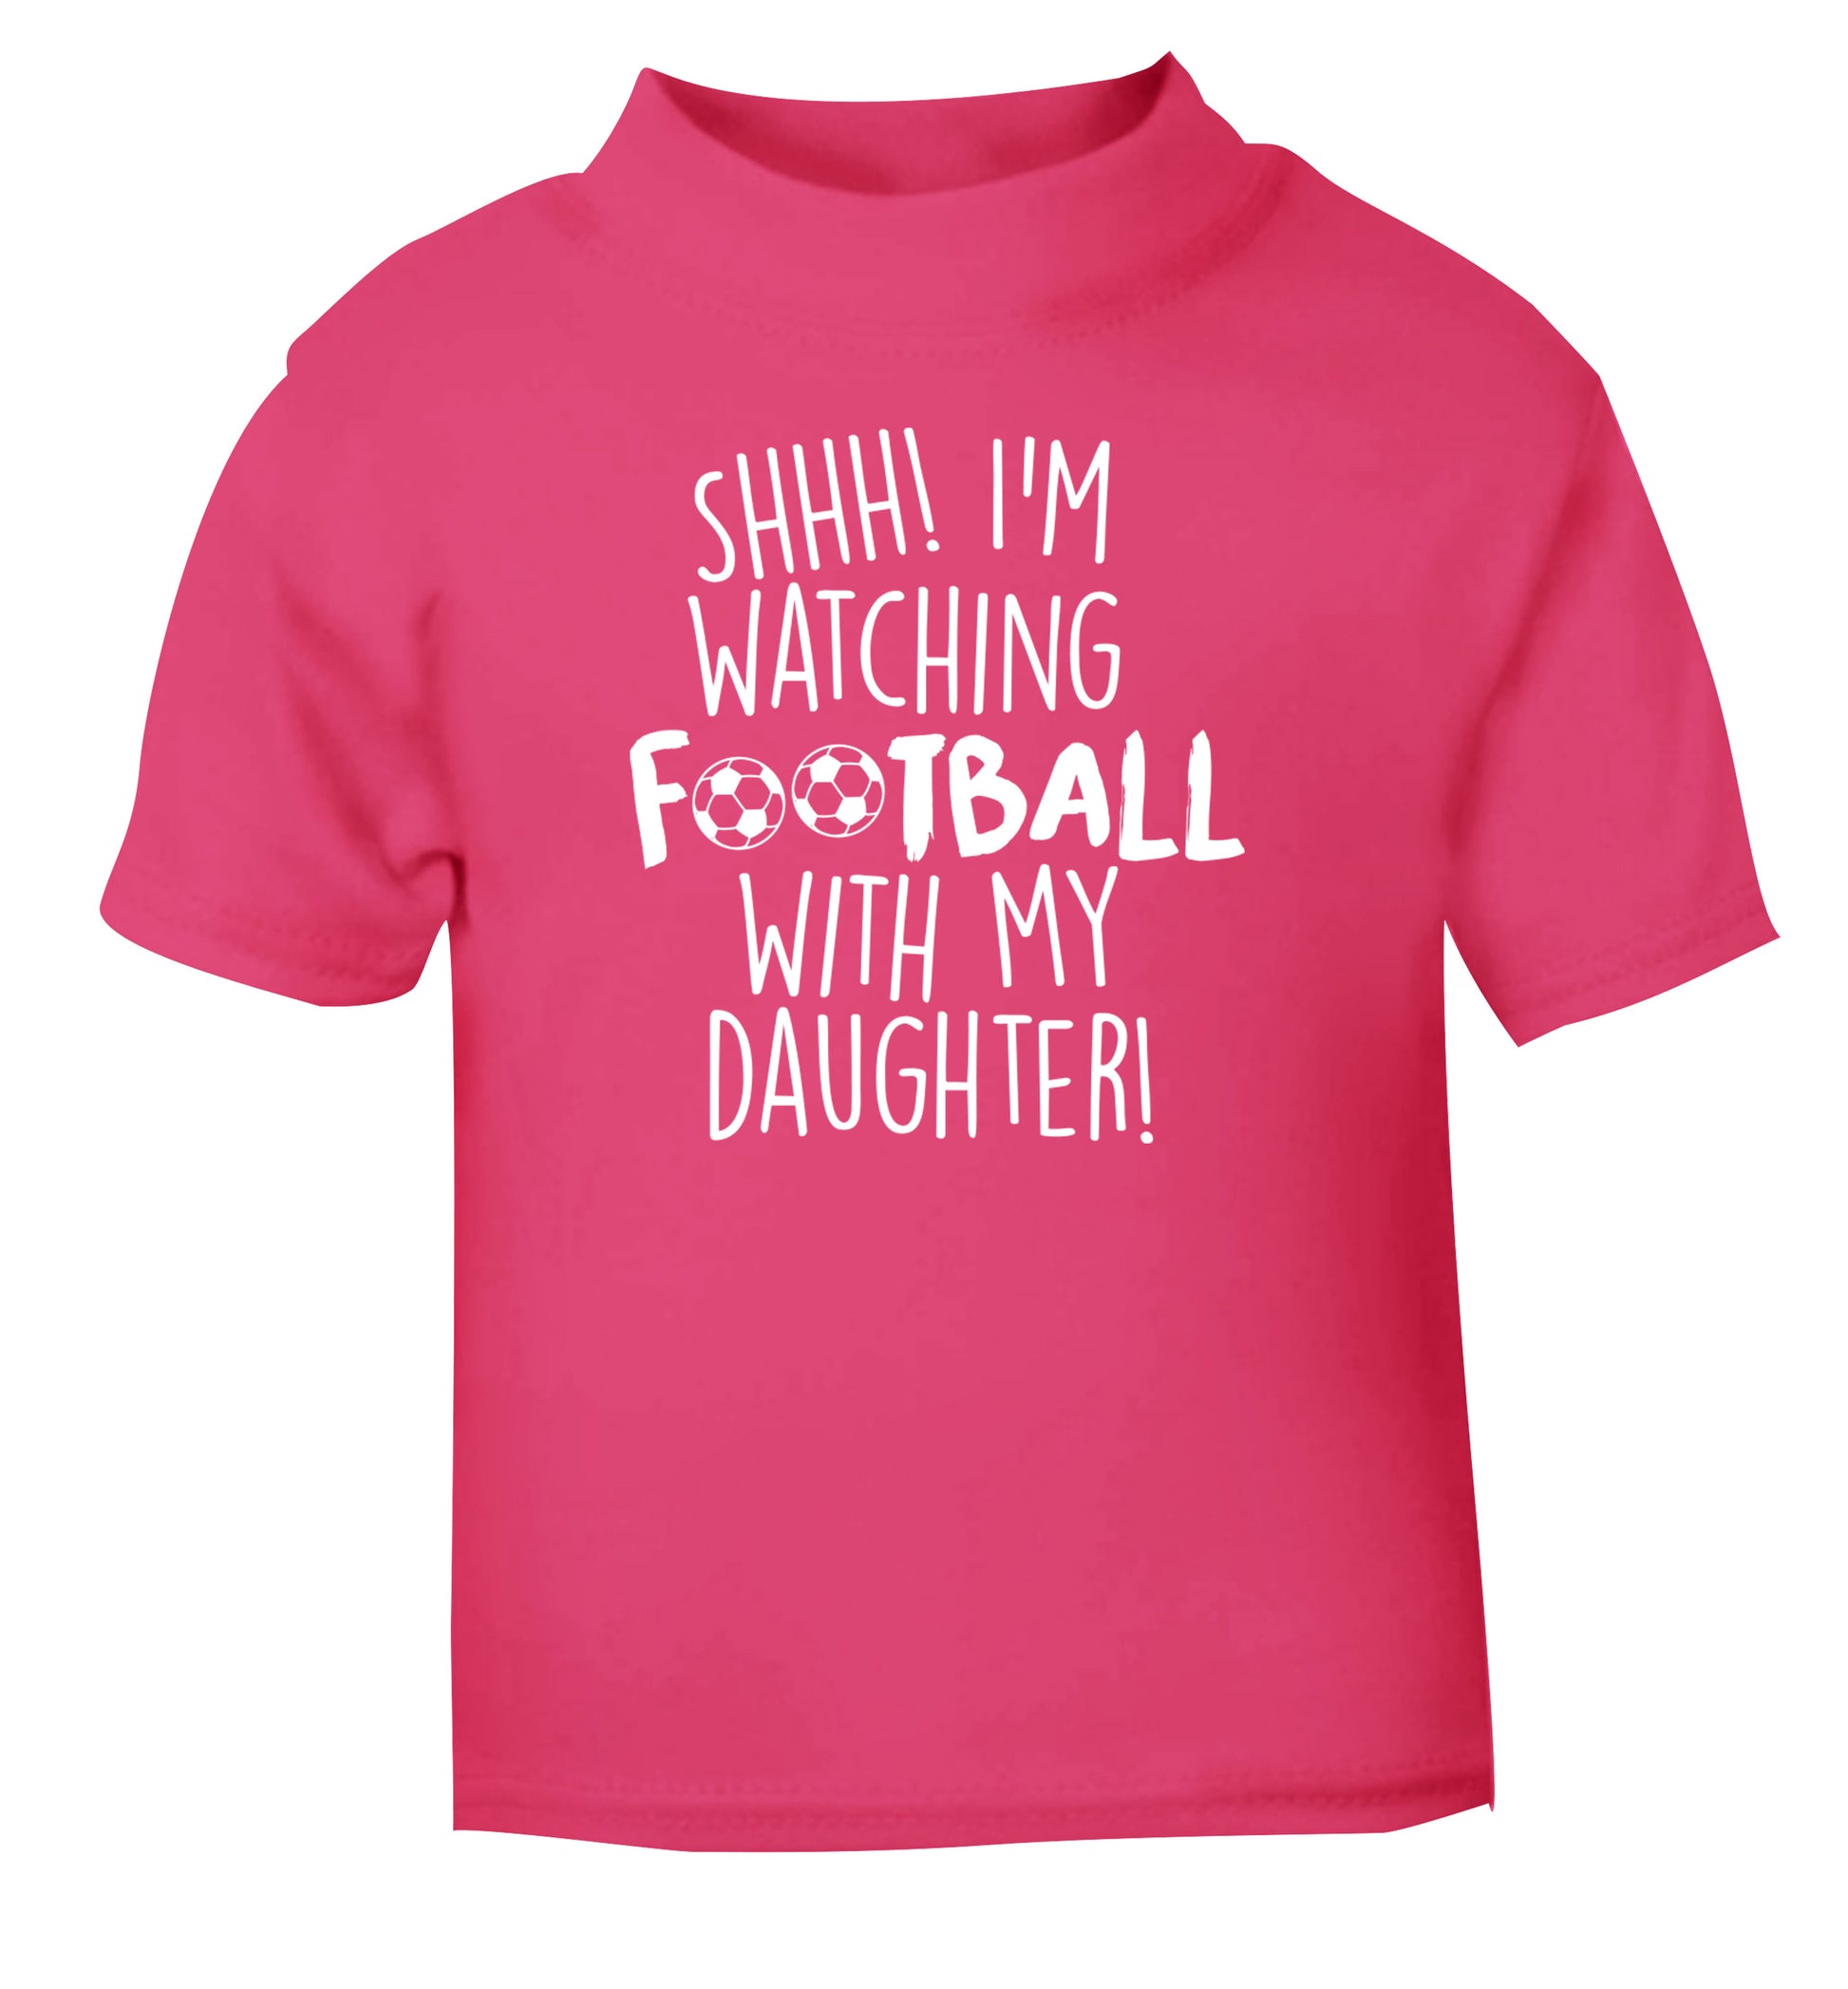 Shhh I'm watching football with my daughter pink Baby Toddler Tshirt 2 Years